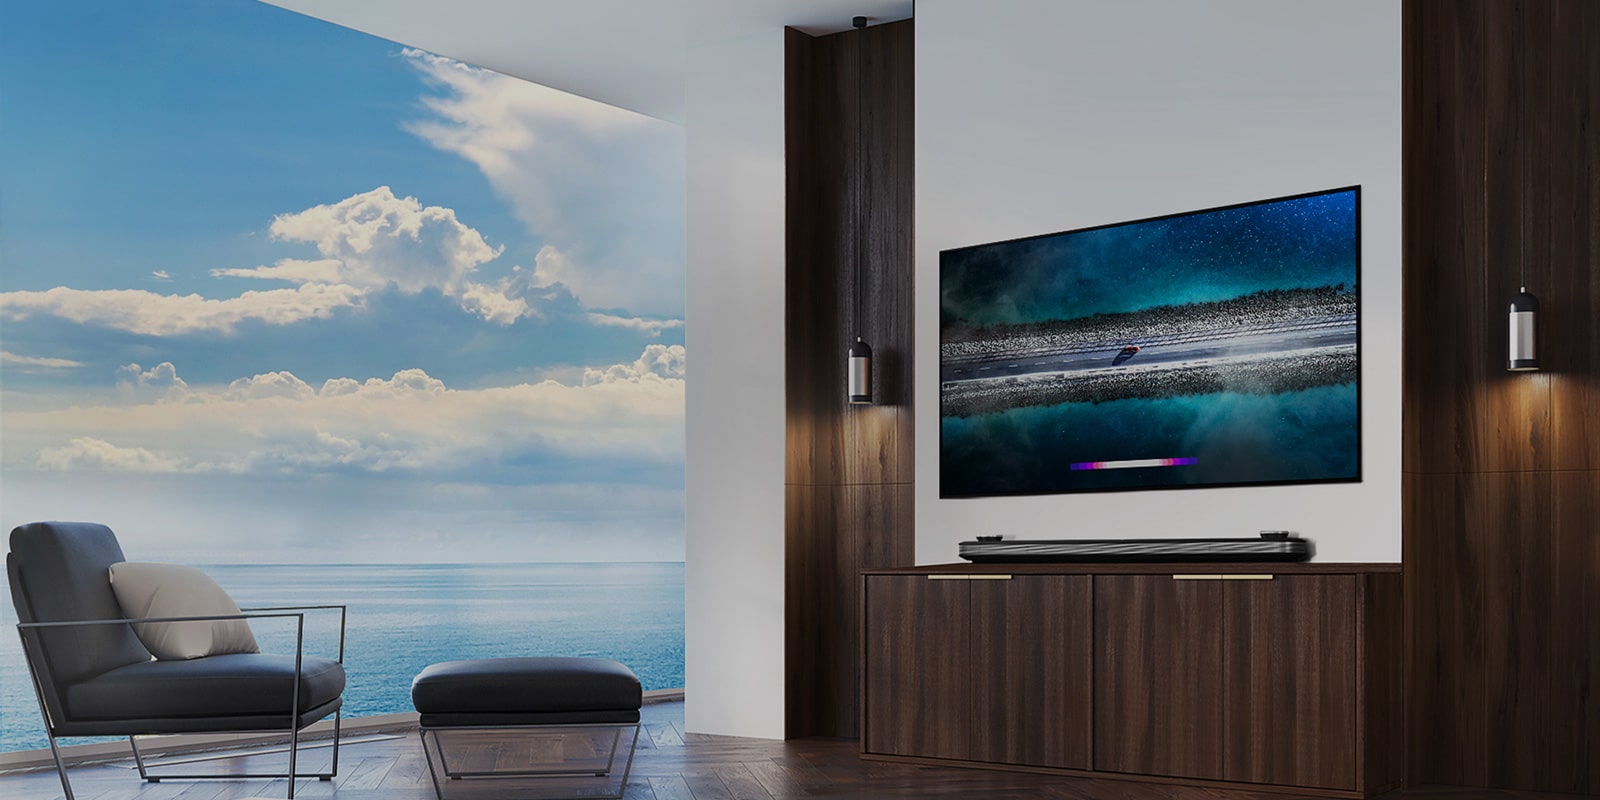 LG SIGNATURE OLED TV W9 is hung on the wall and a counch is laid right in front of tv with the blue sky over the window.